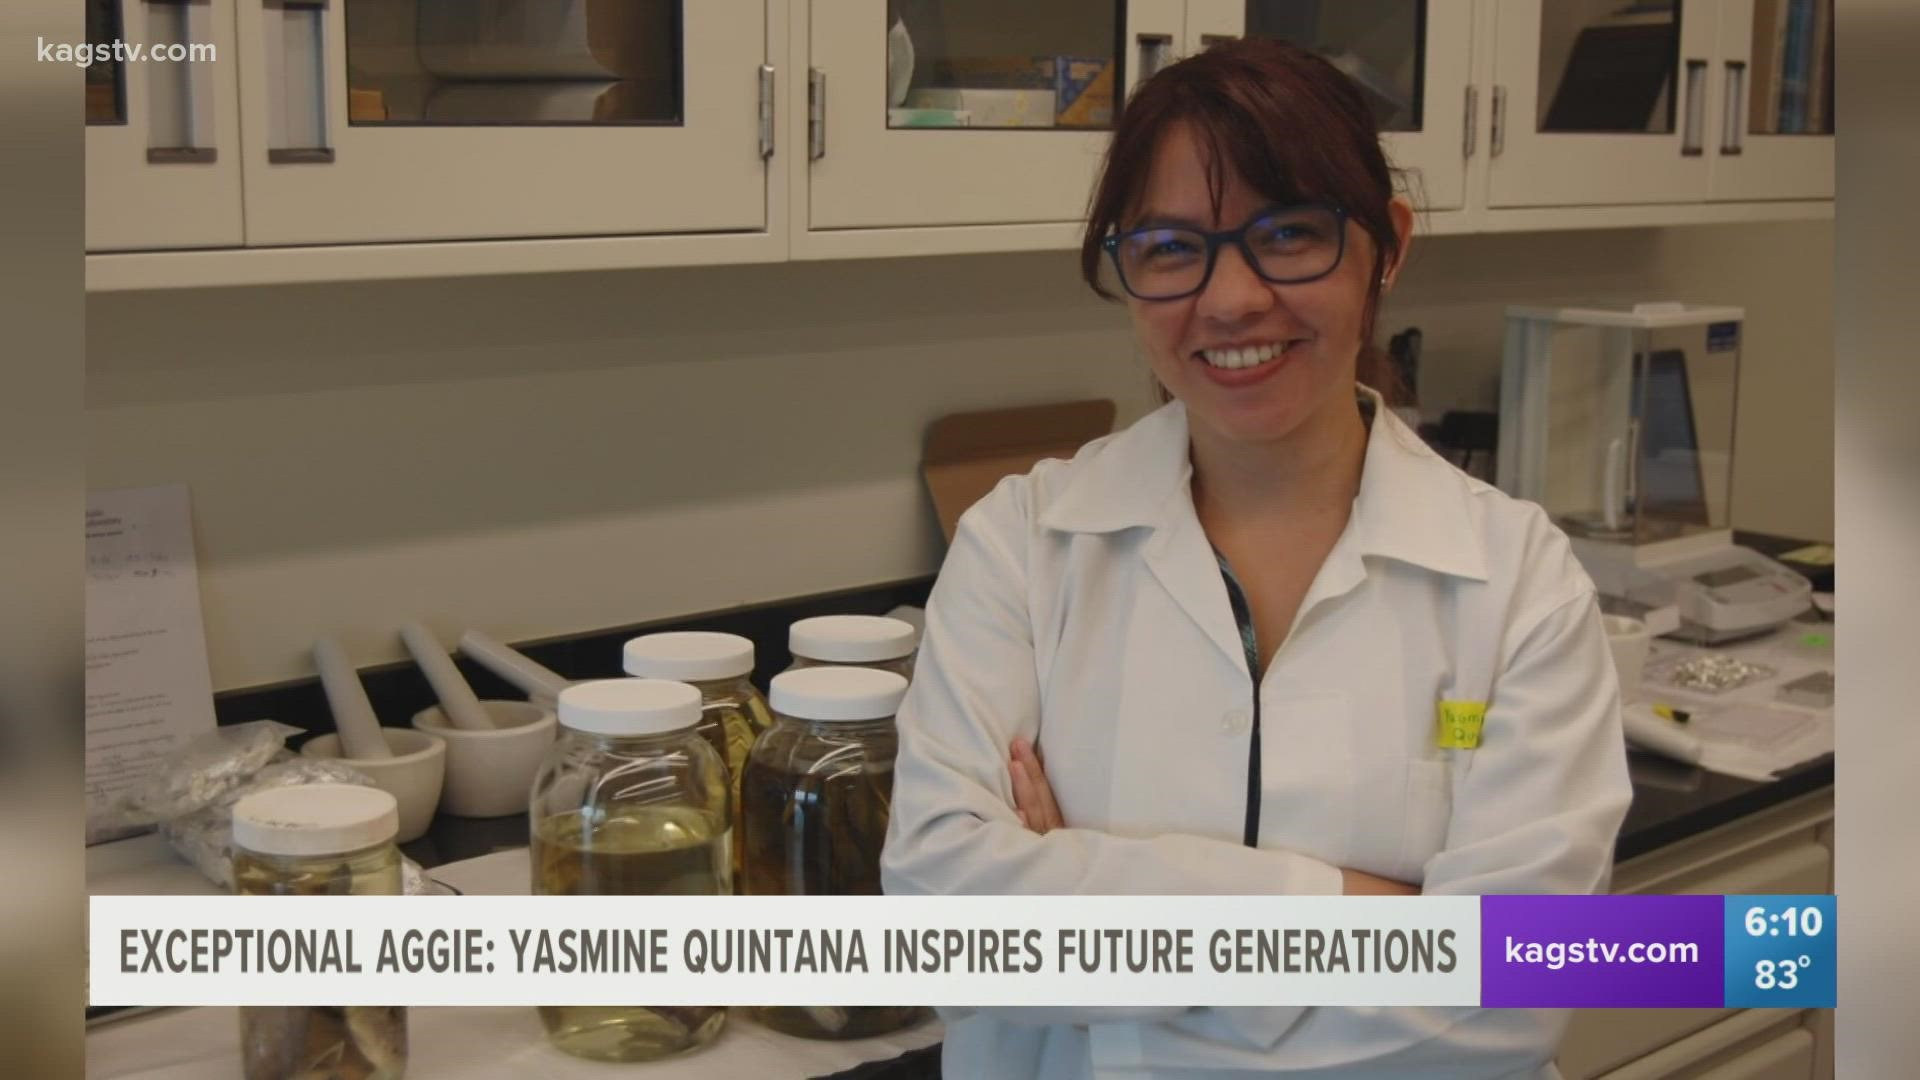 Yasmin Quintana hopes her passion for science will inspire other aspiring young women scientists